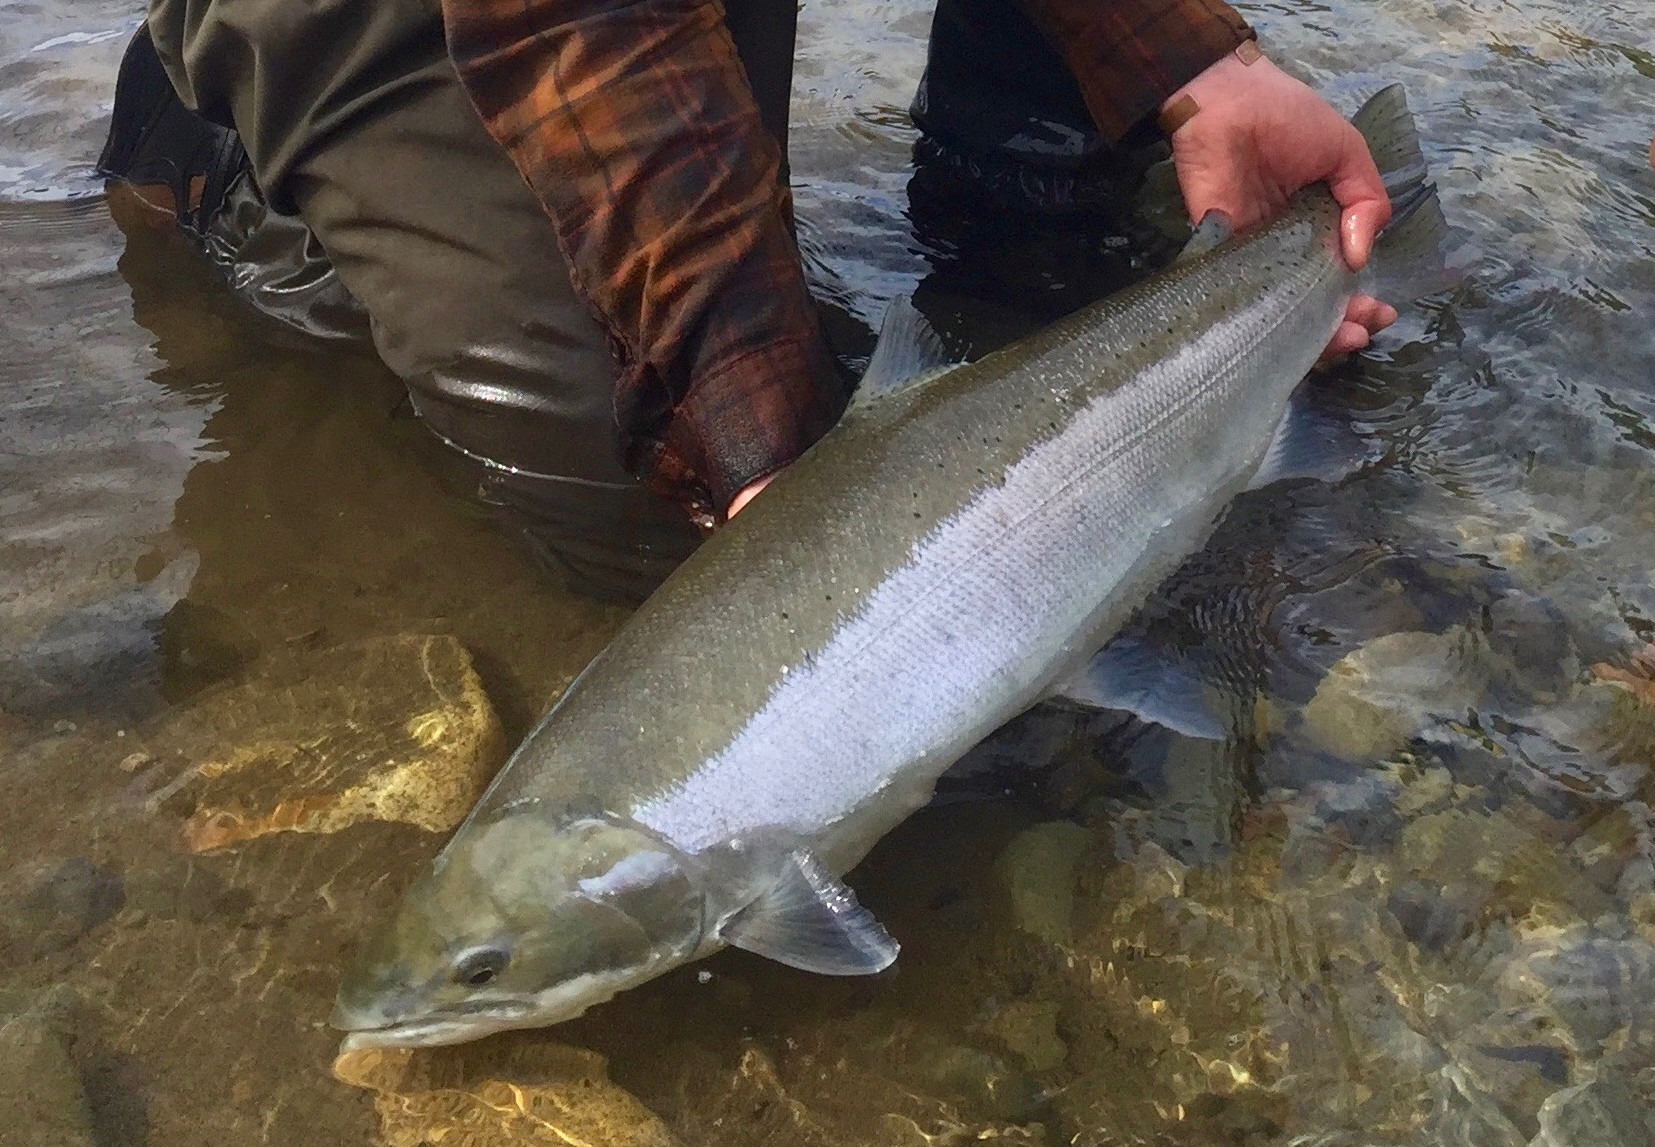 Building a coalition for a sustainable wild steelhead fishery in